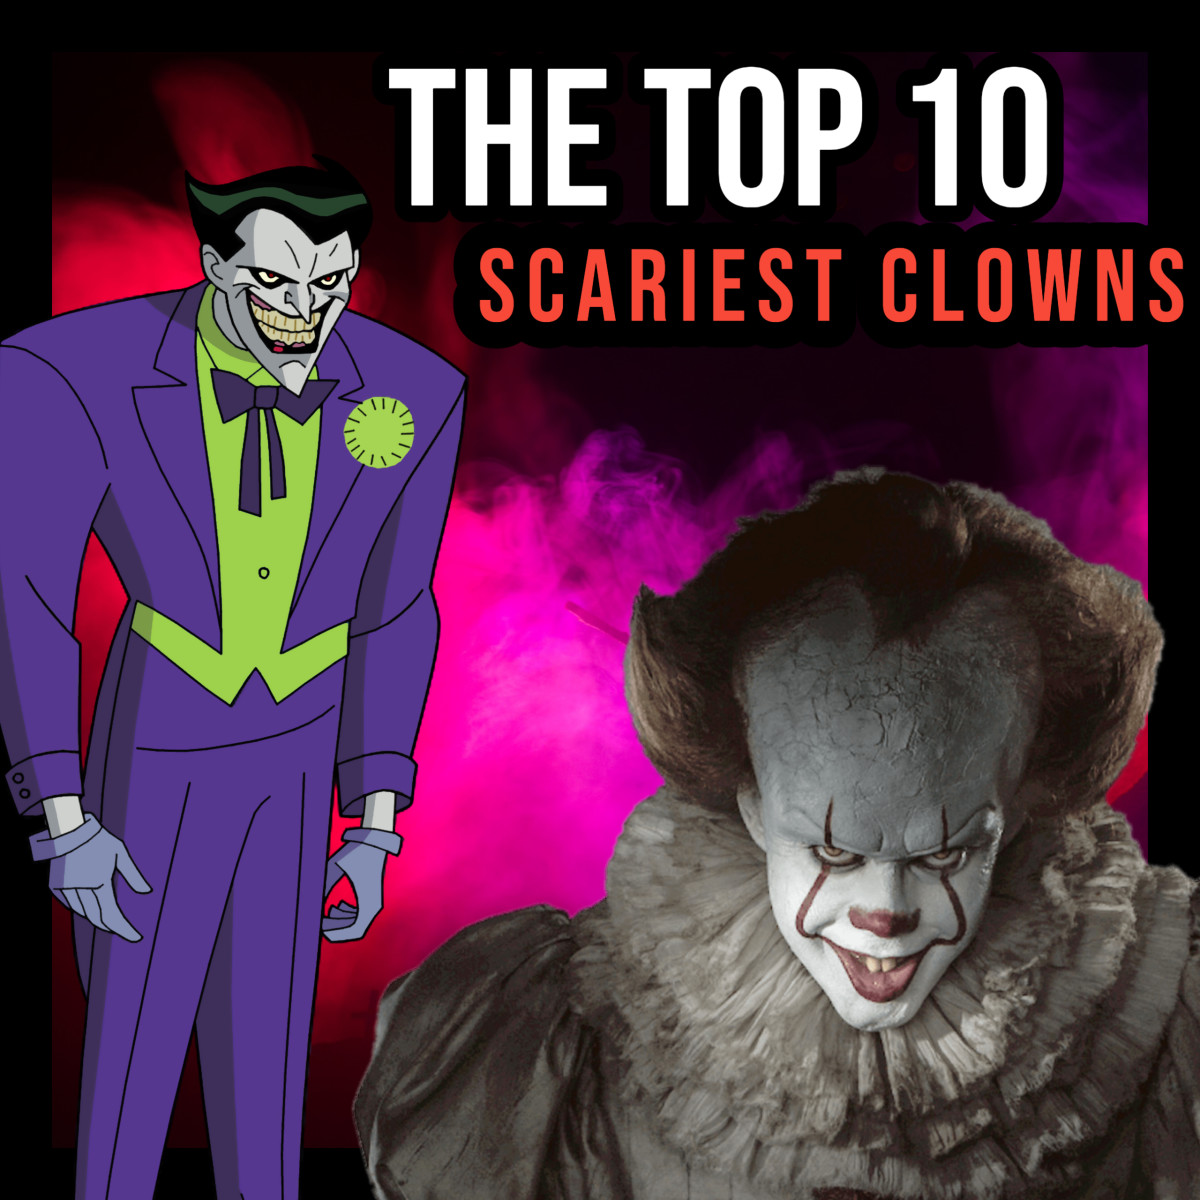 Top 10 Scariest Clowns in Movies, TV, and Games